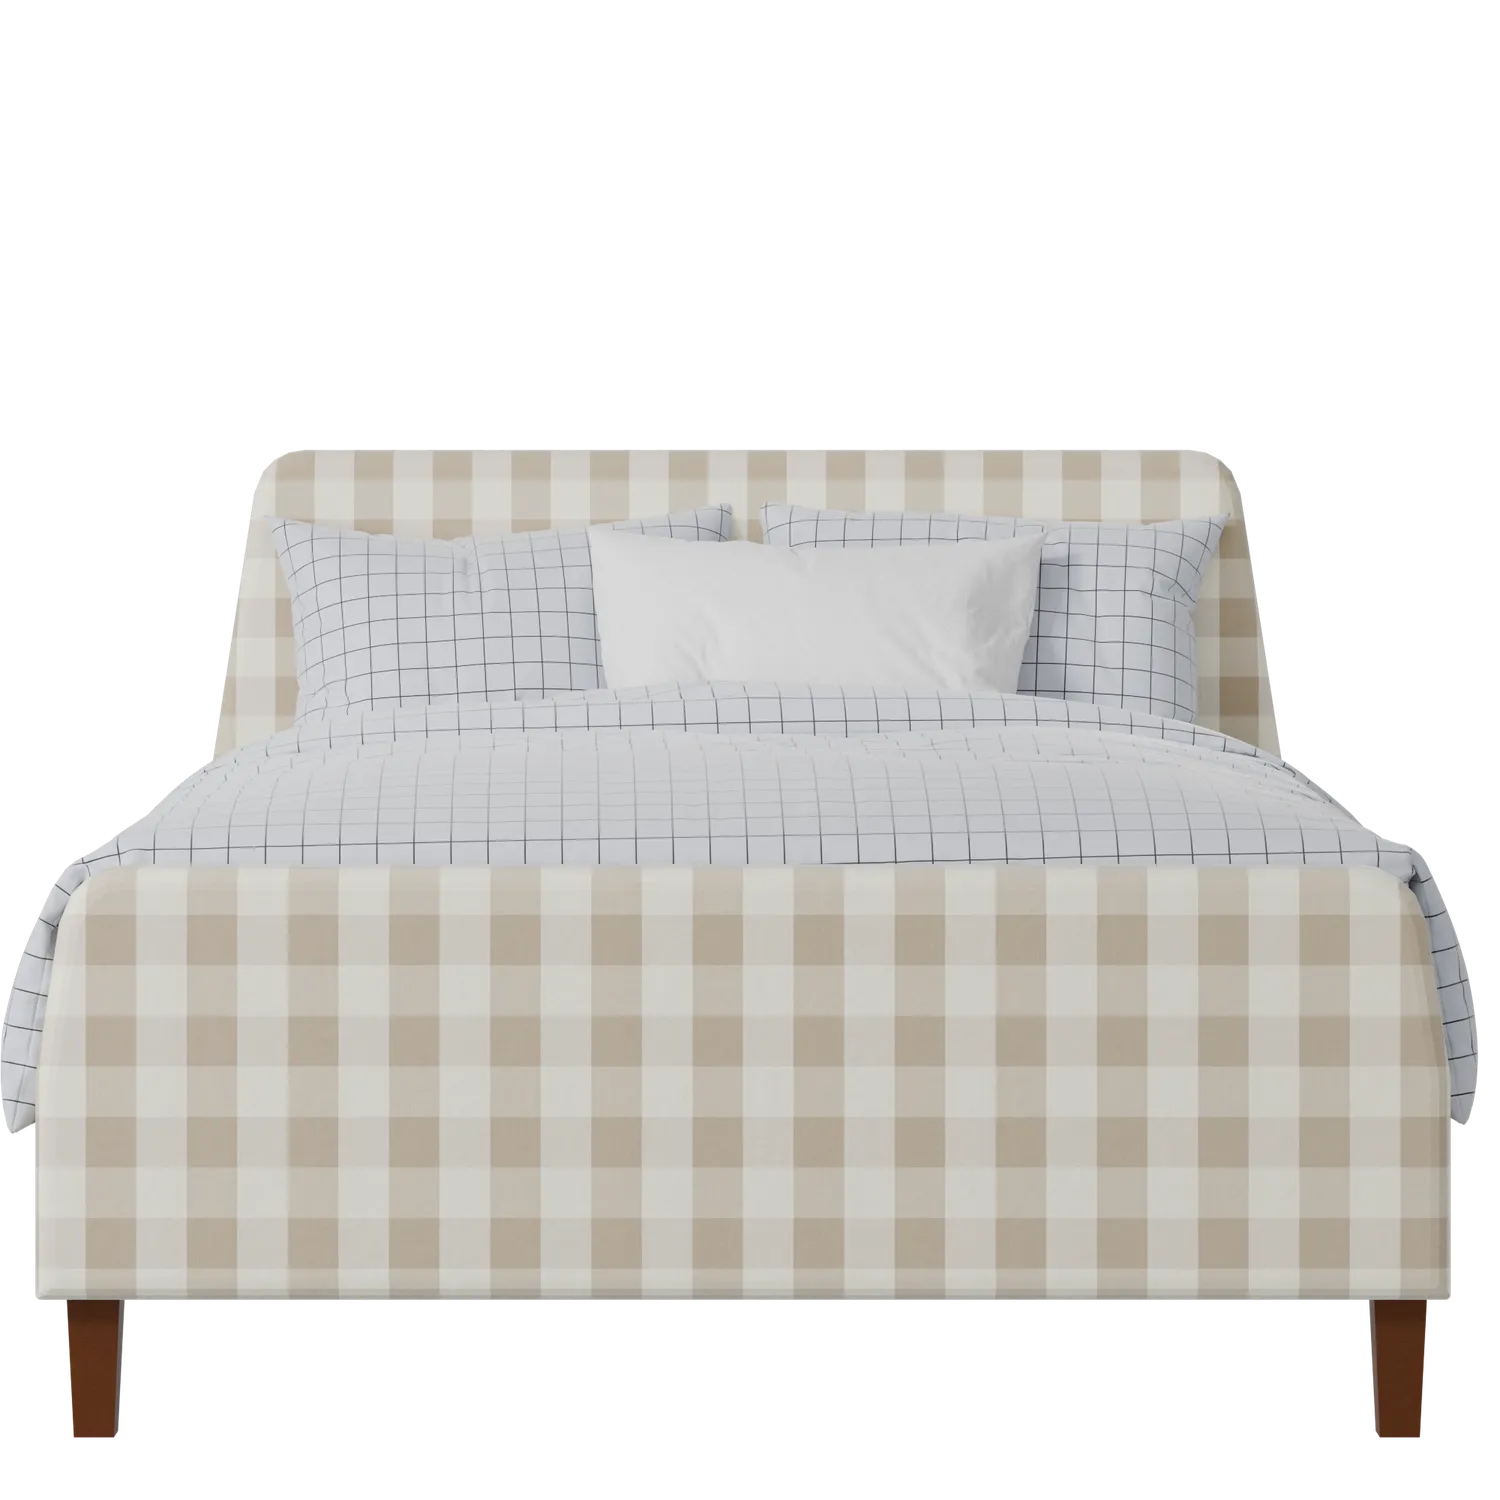 Hanwell upholstered bed in Romo Kemble Putty fabric